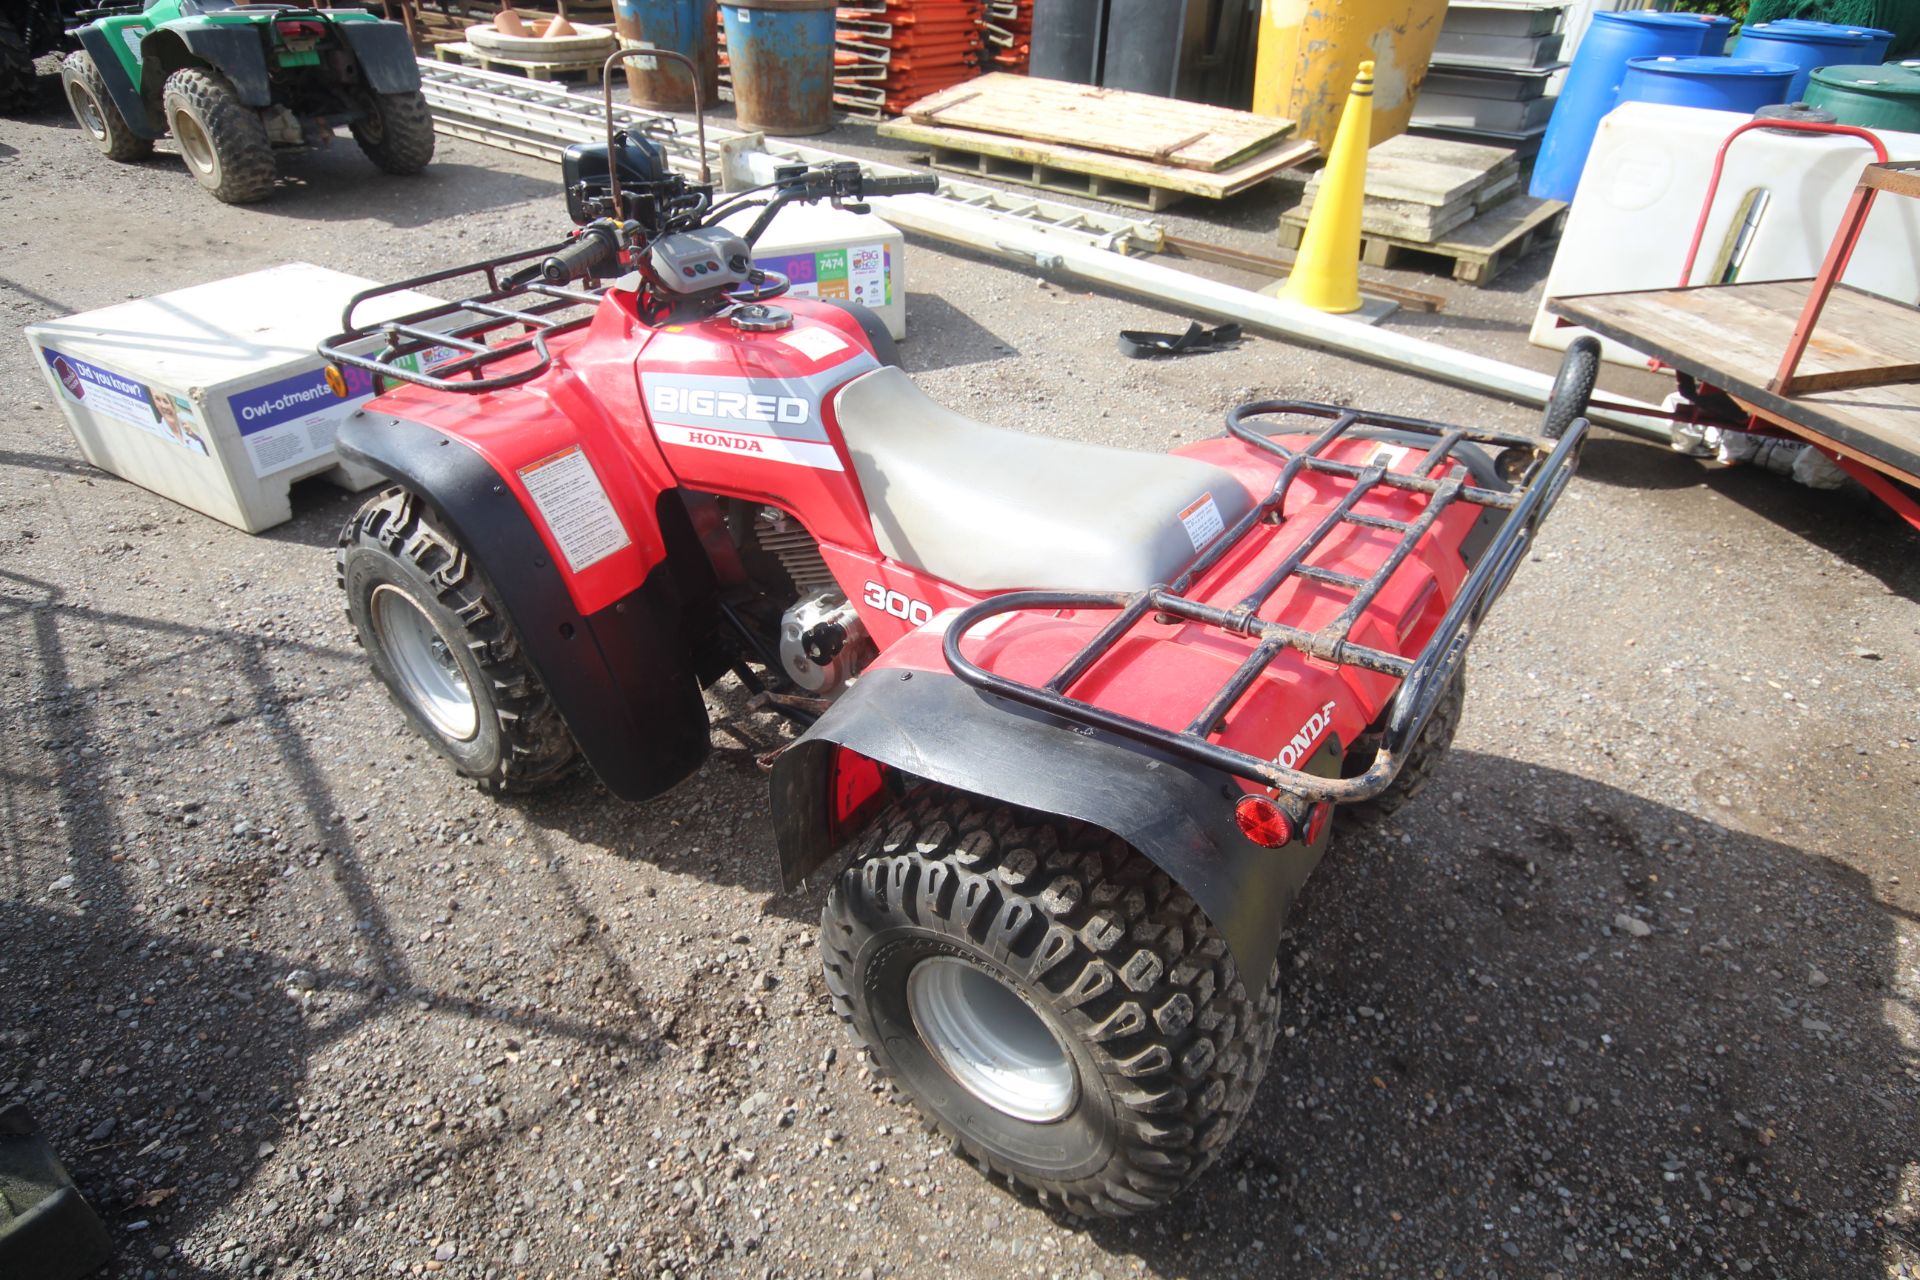 Honda Big Red 300 2WD quad bike. 1992. Owned from new. Key held. V - Image 3 of 24